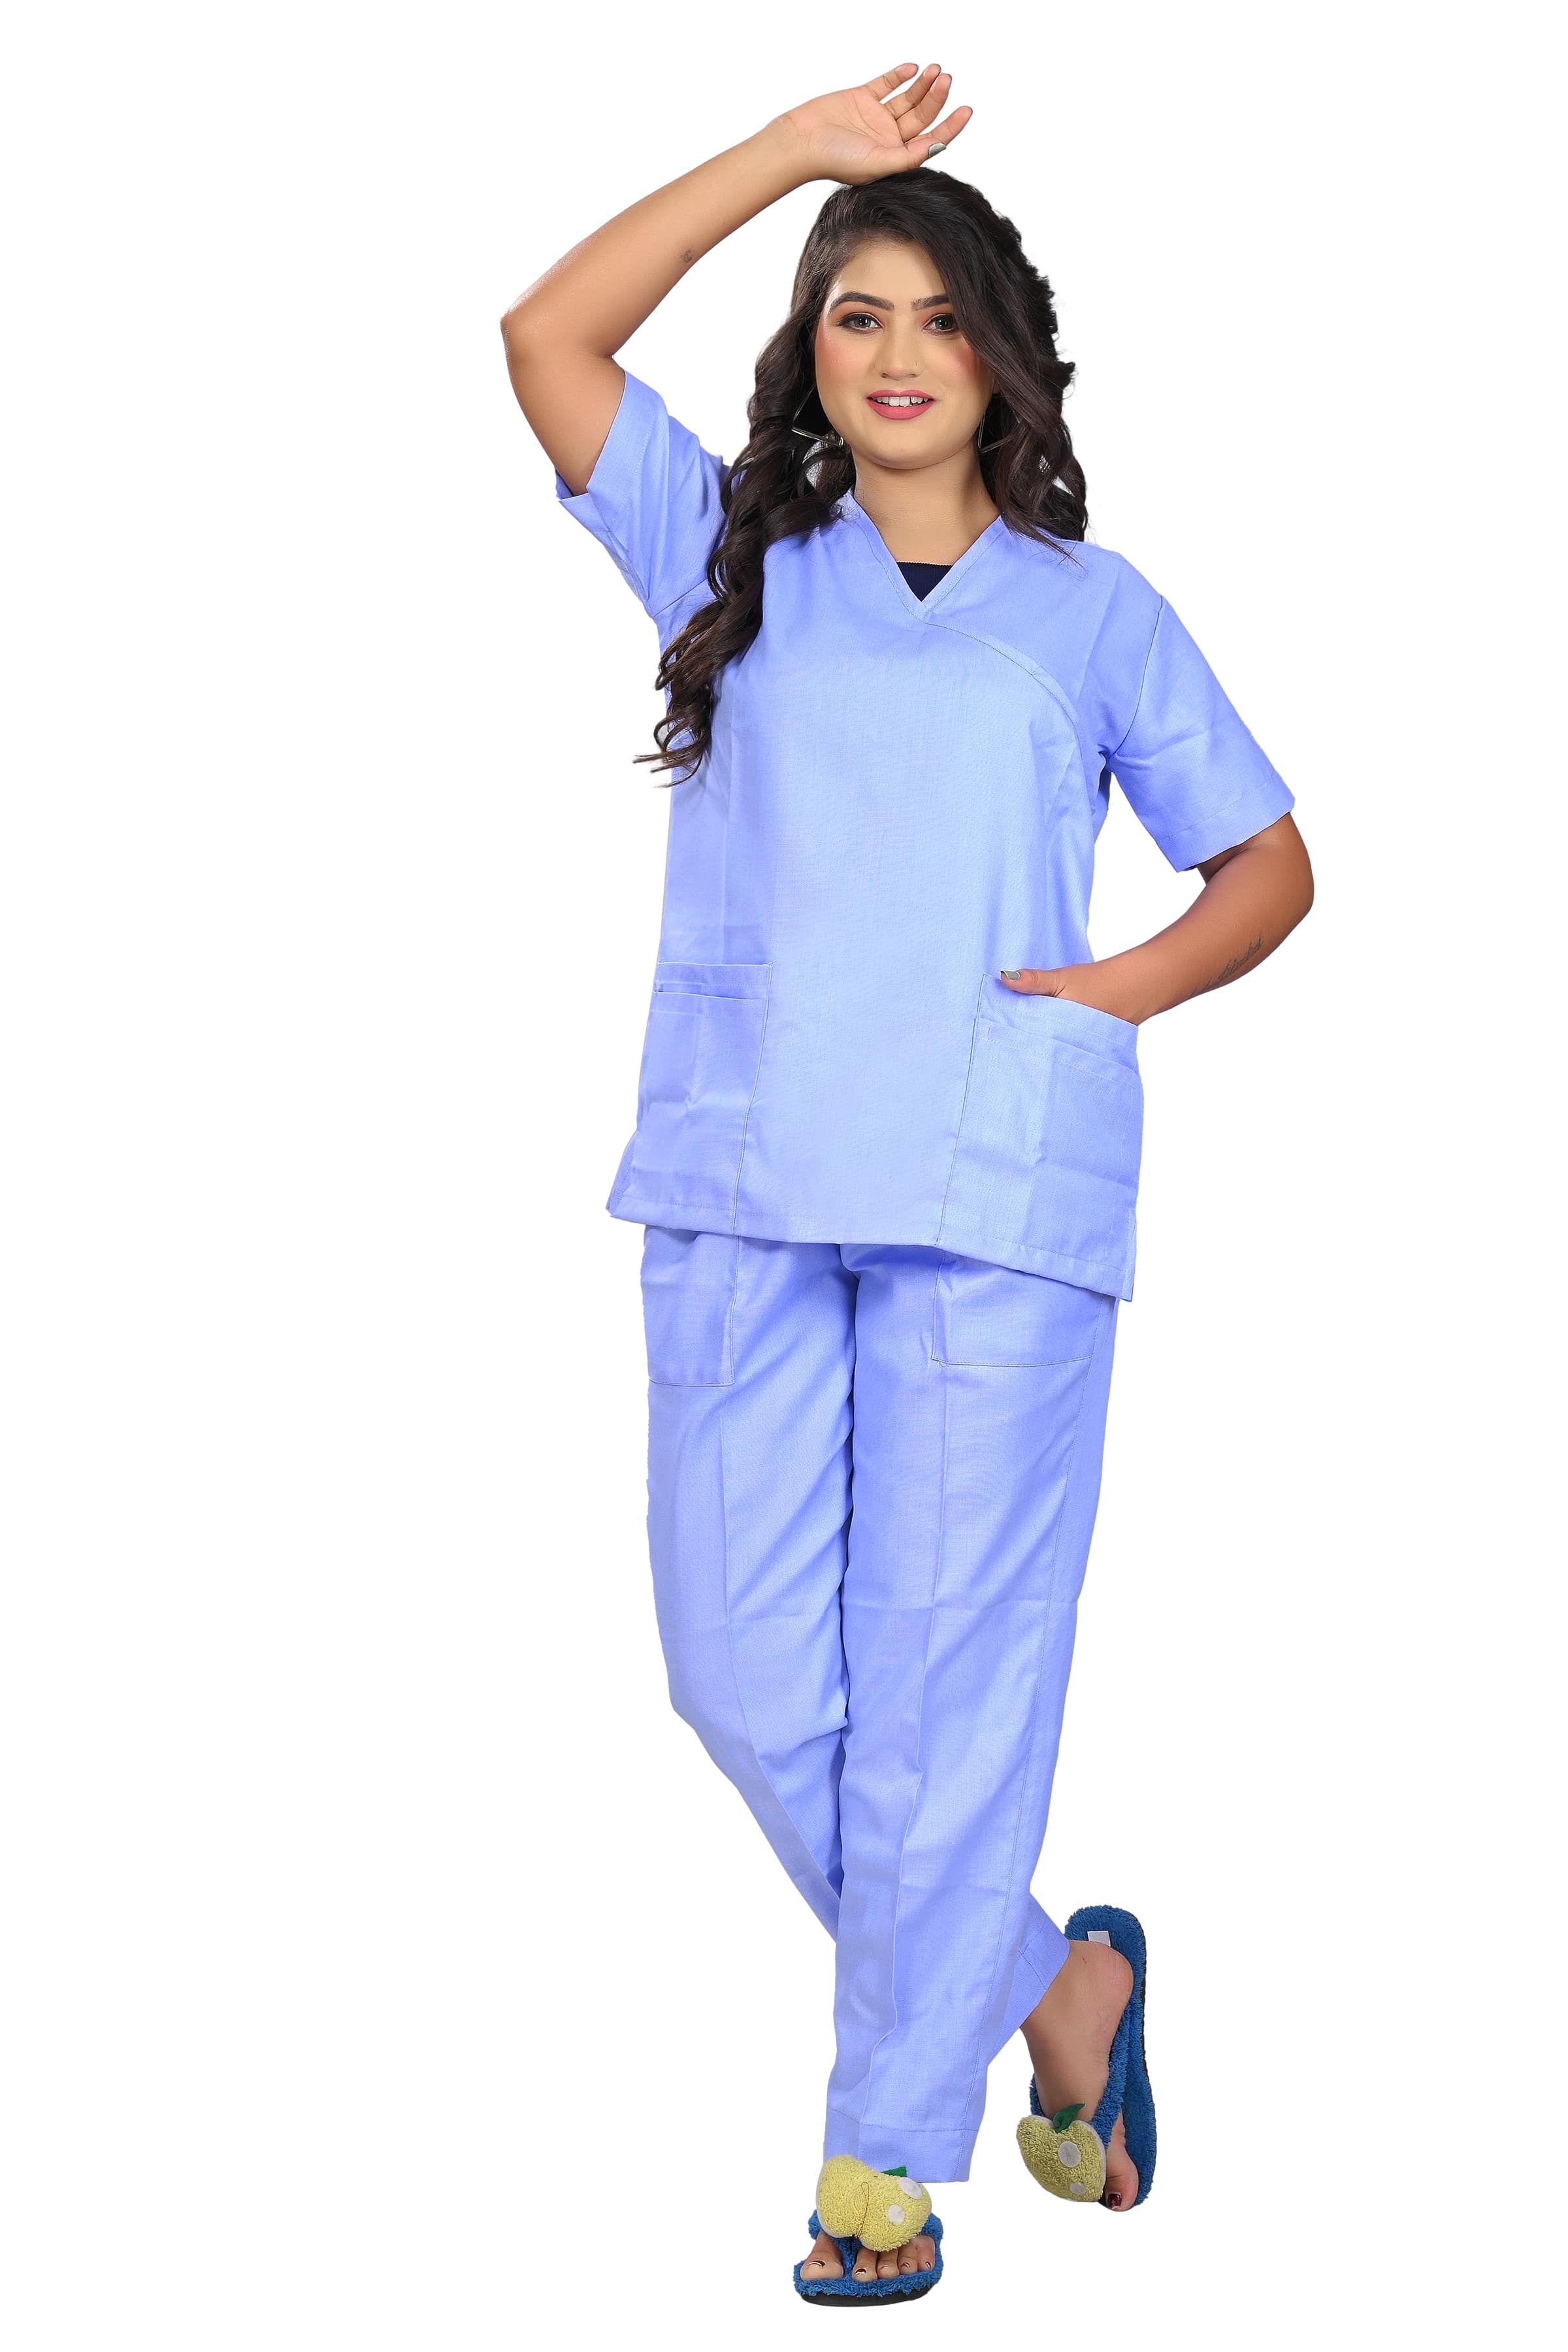 Sky Blue Scrub Suits for Women